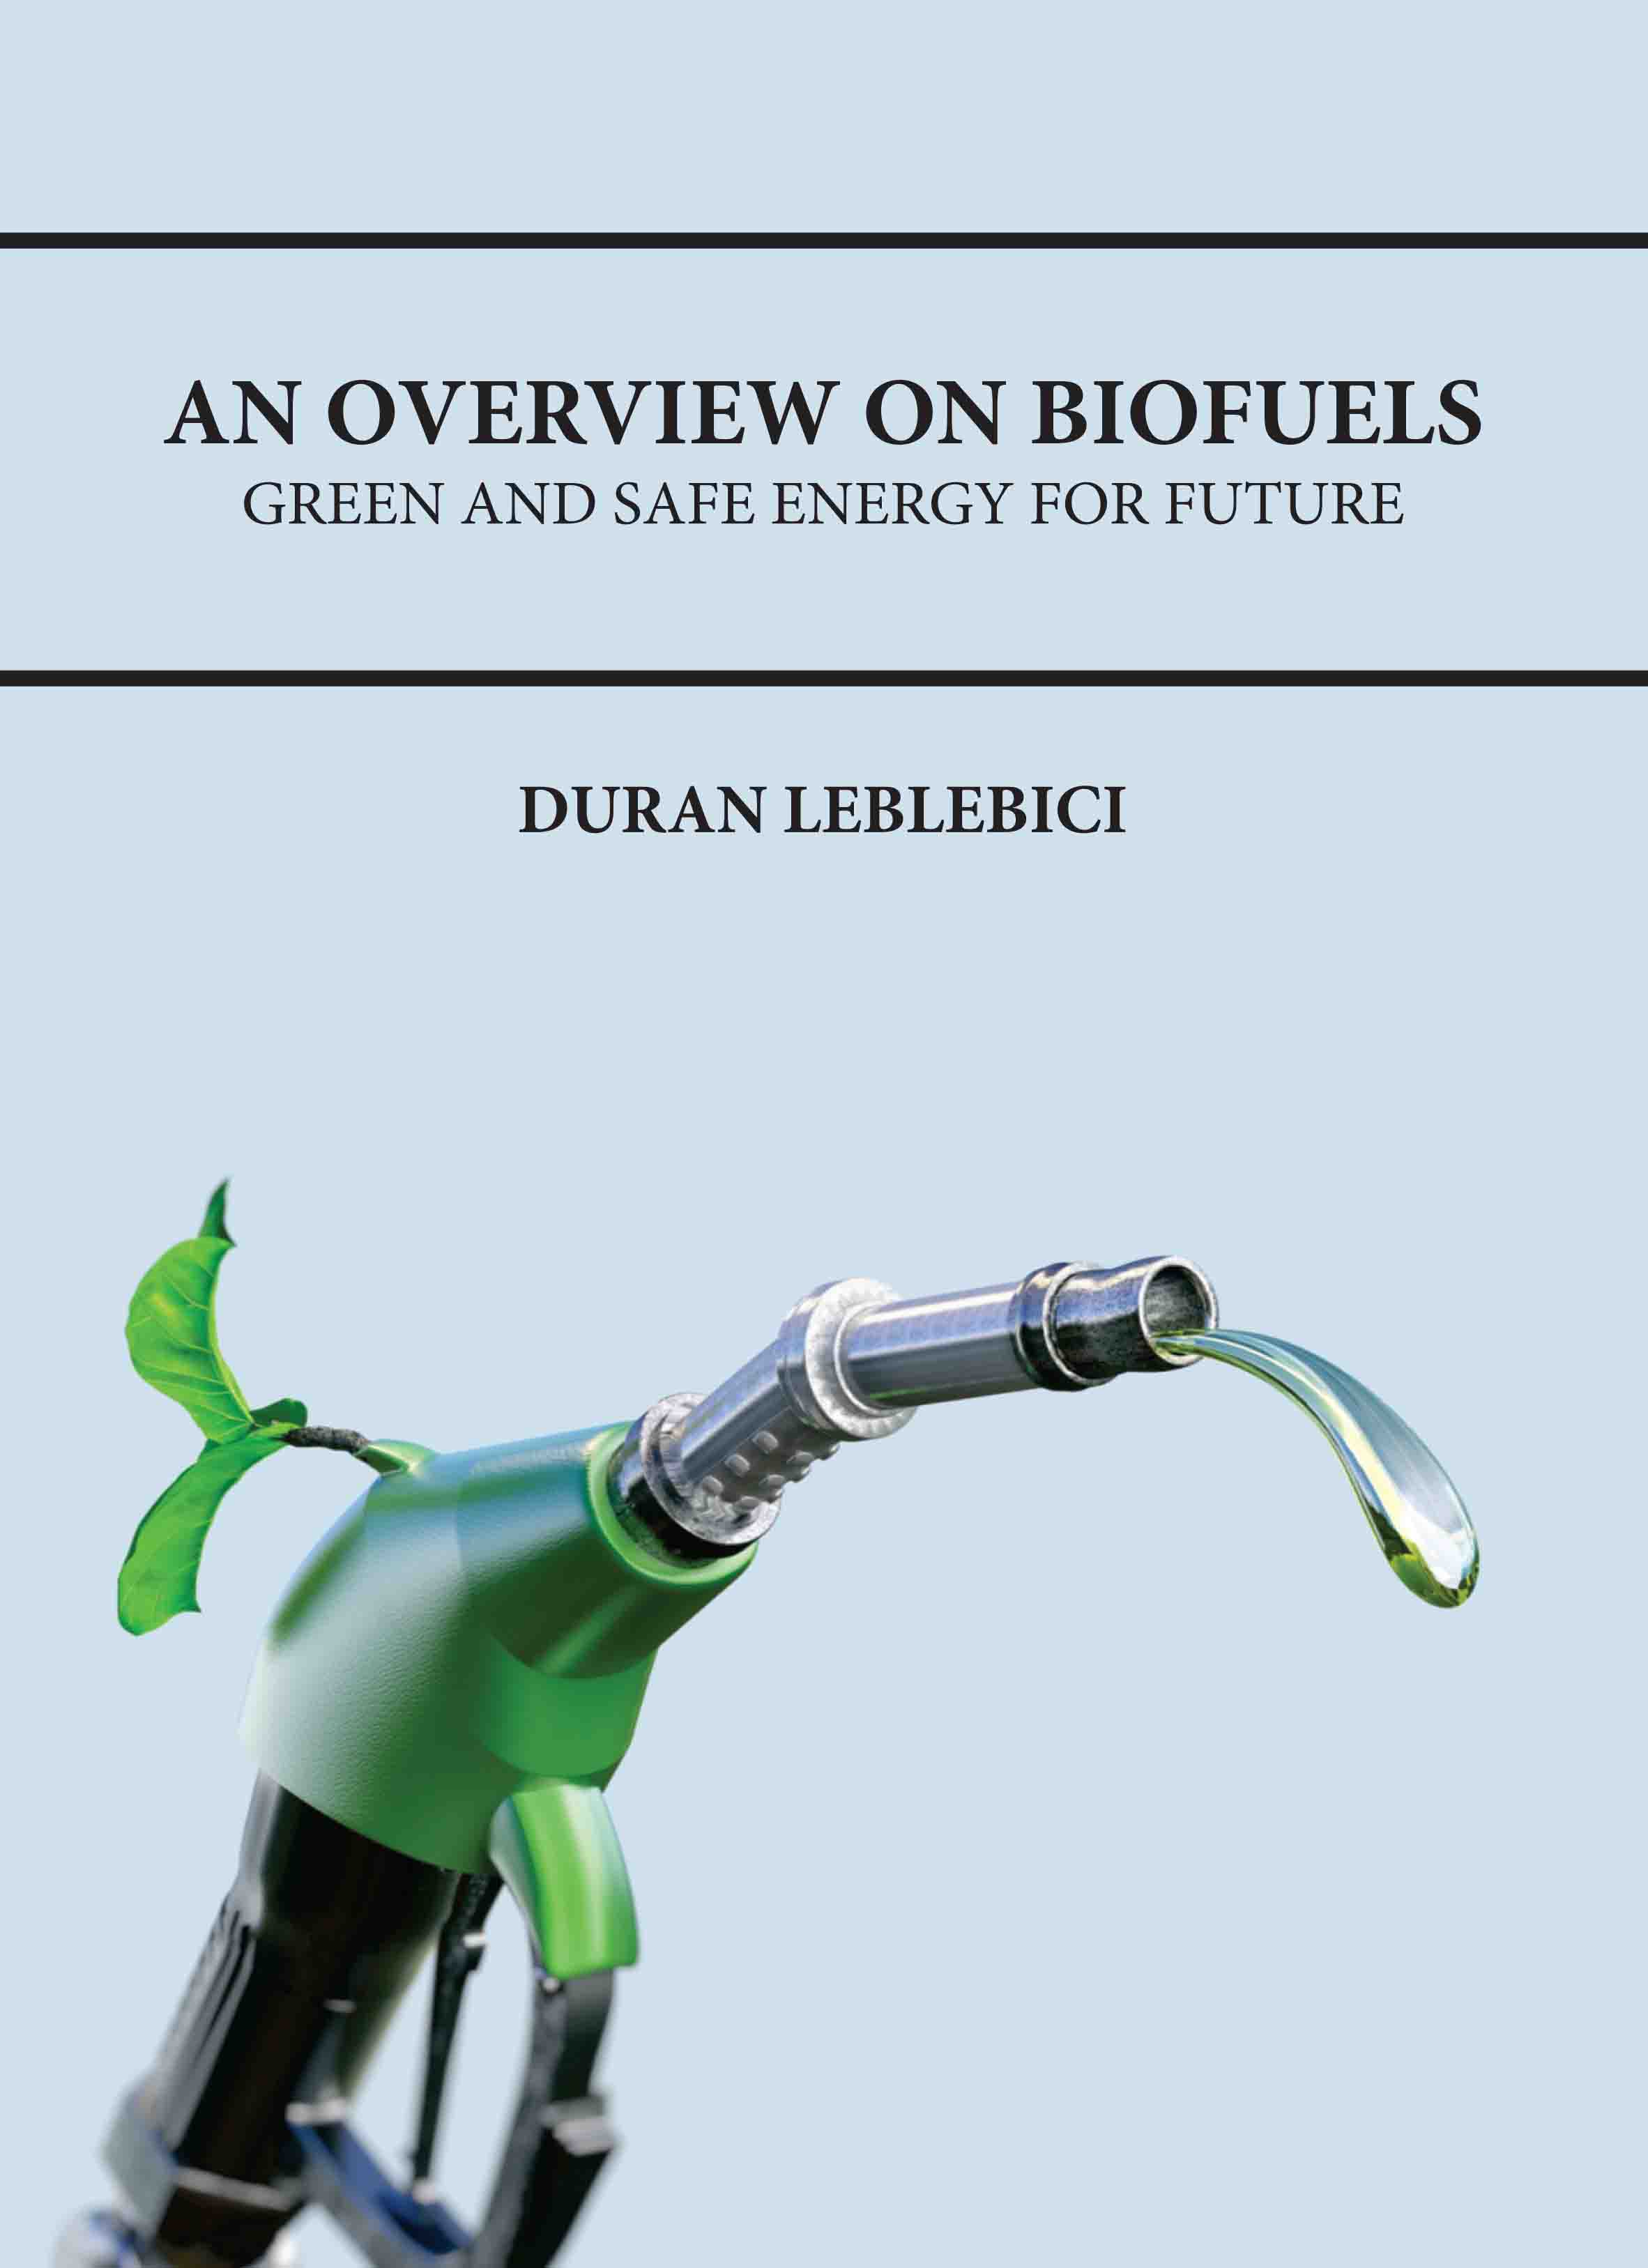 An Overview on Biofuels: Green and Safe Energy for Future